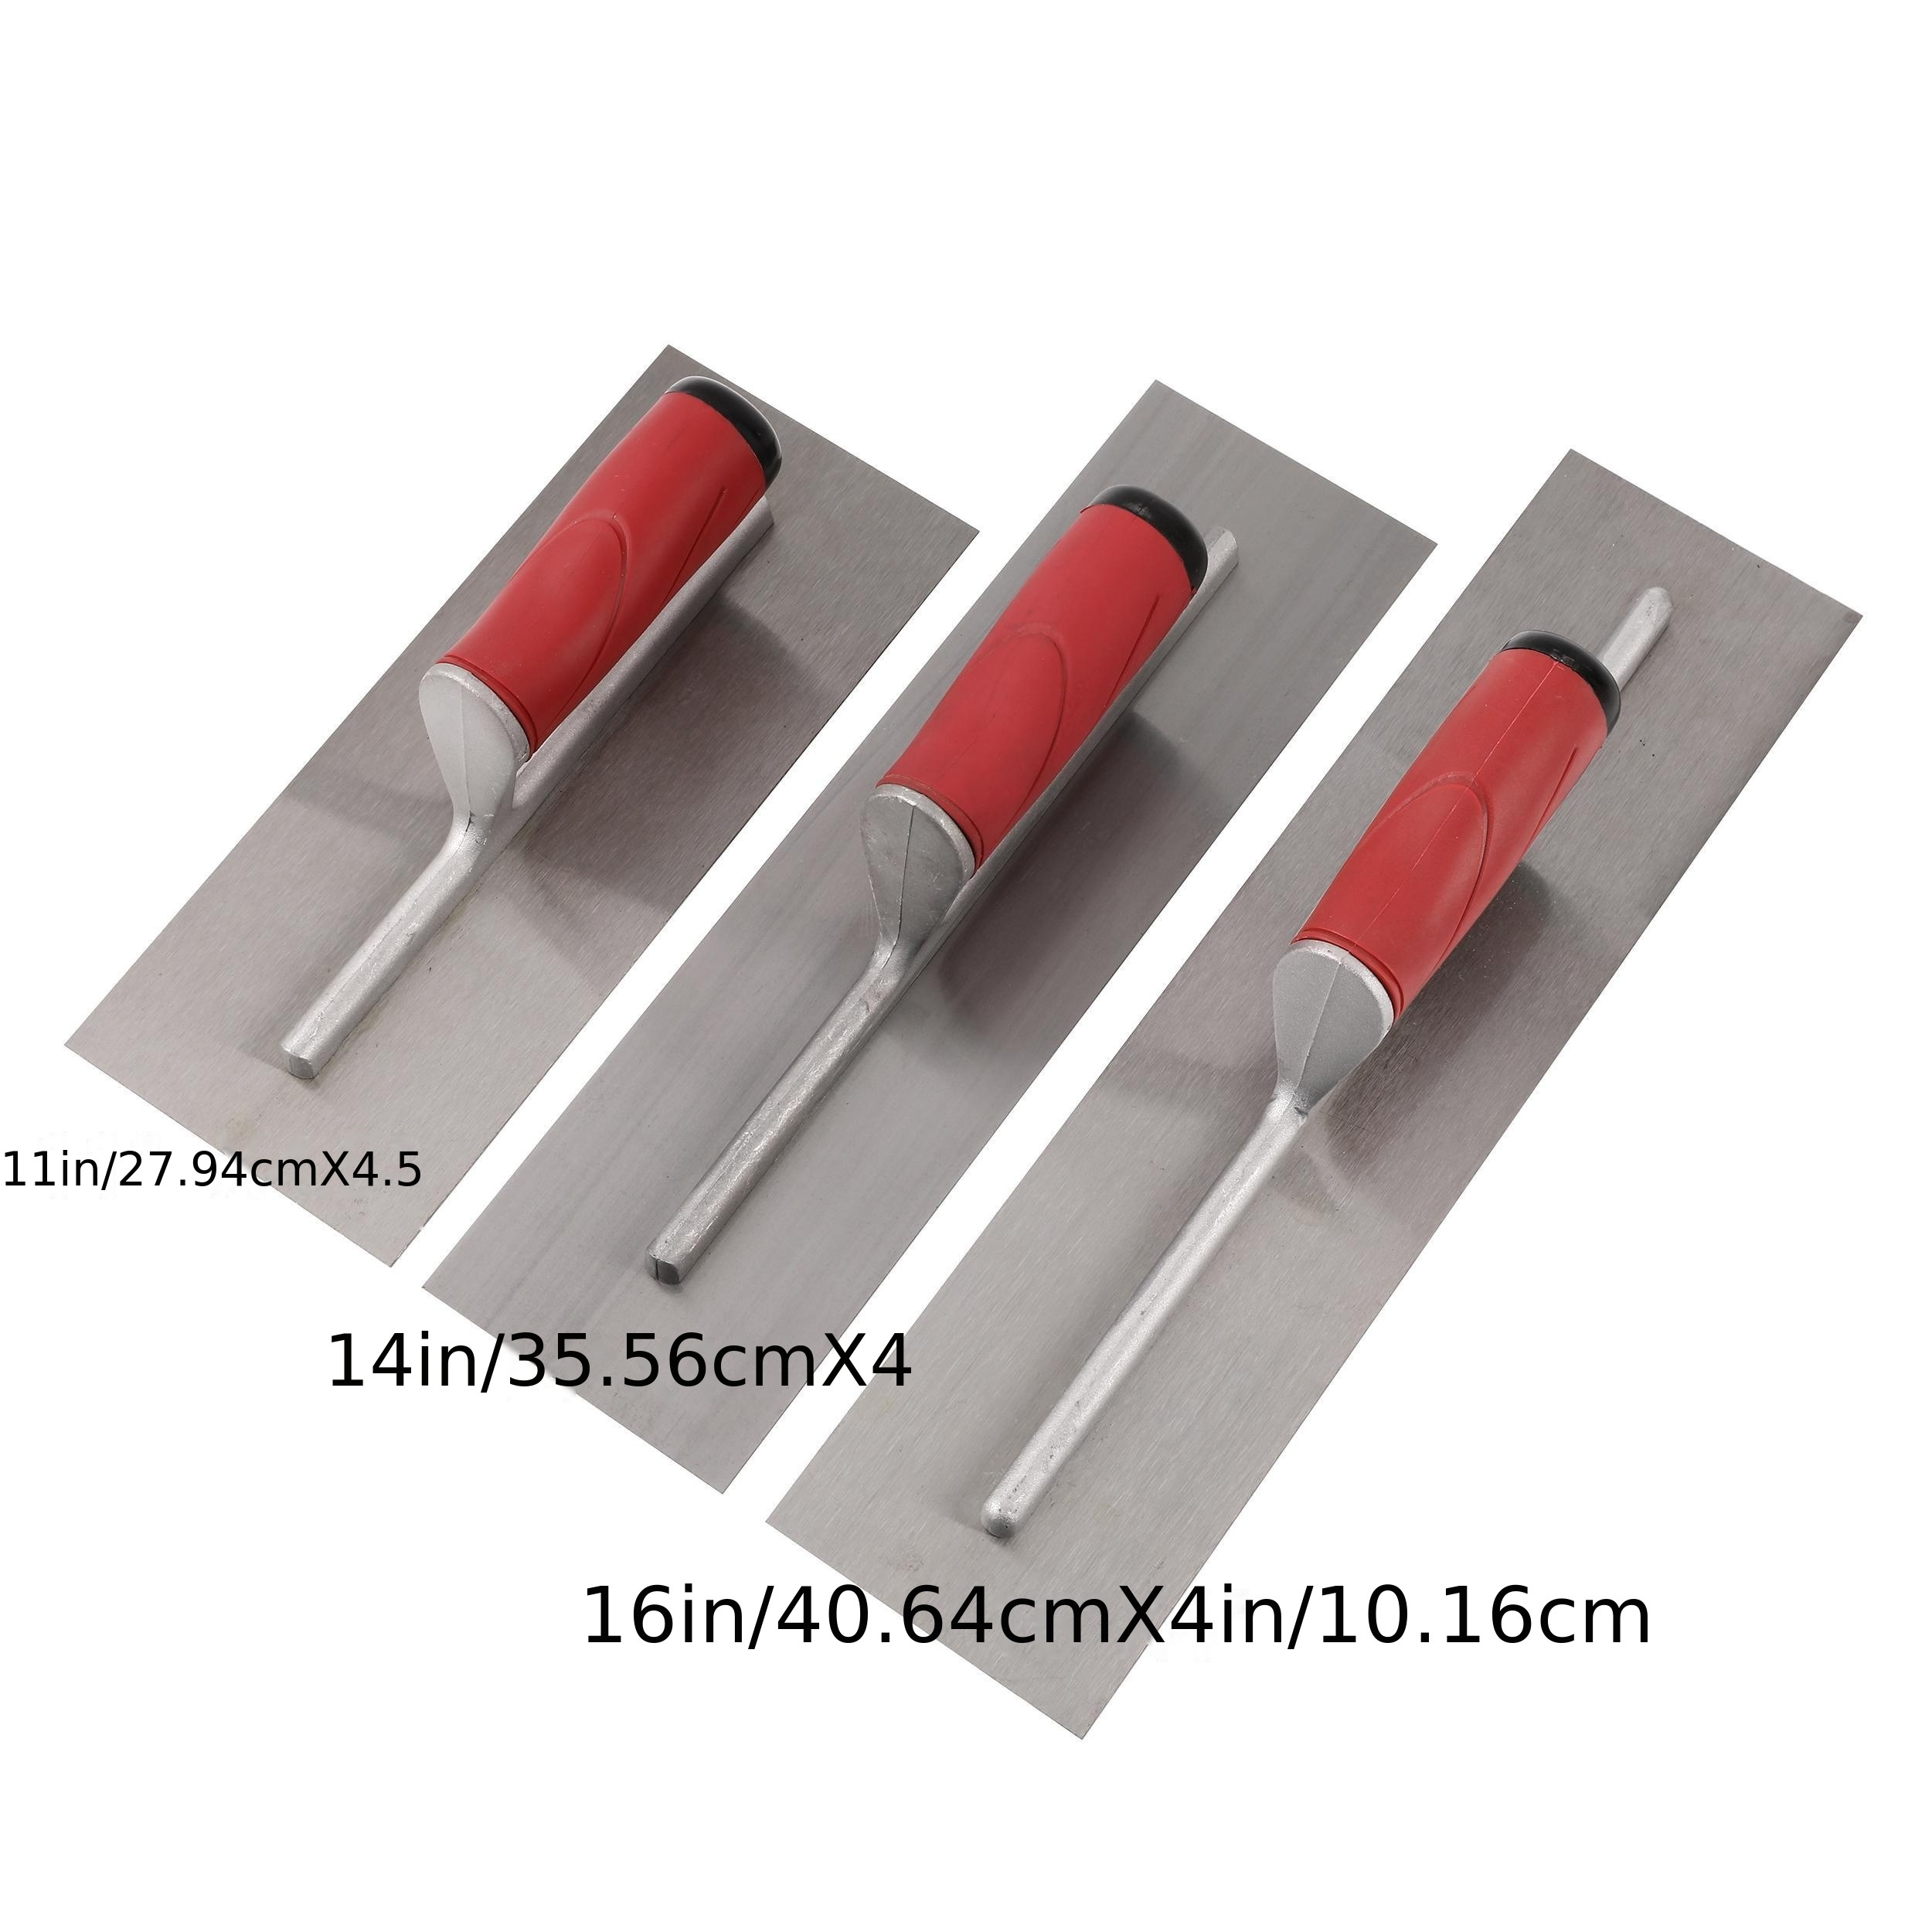 

3-piece Stainless Steel Trowel Set For Concrete And Mortar Application